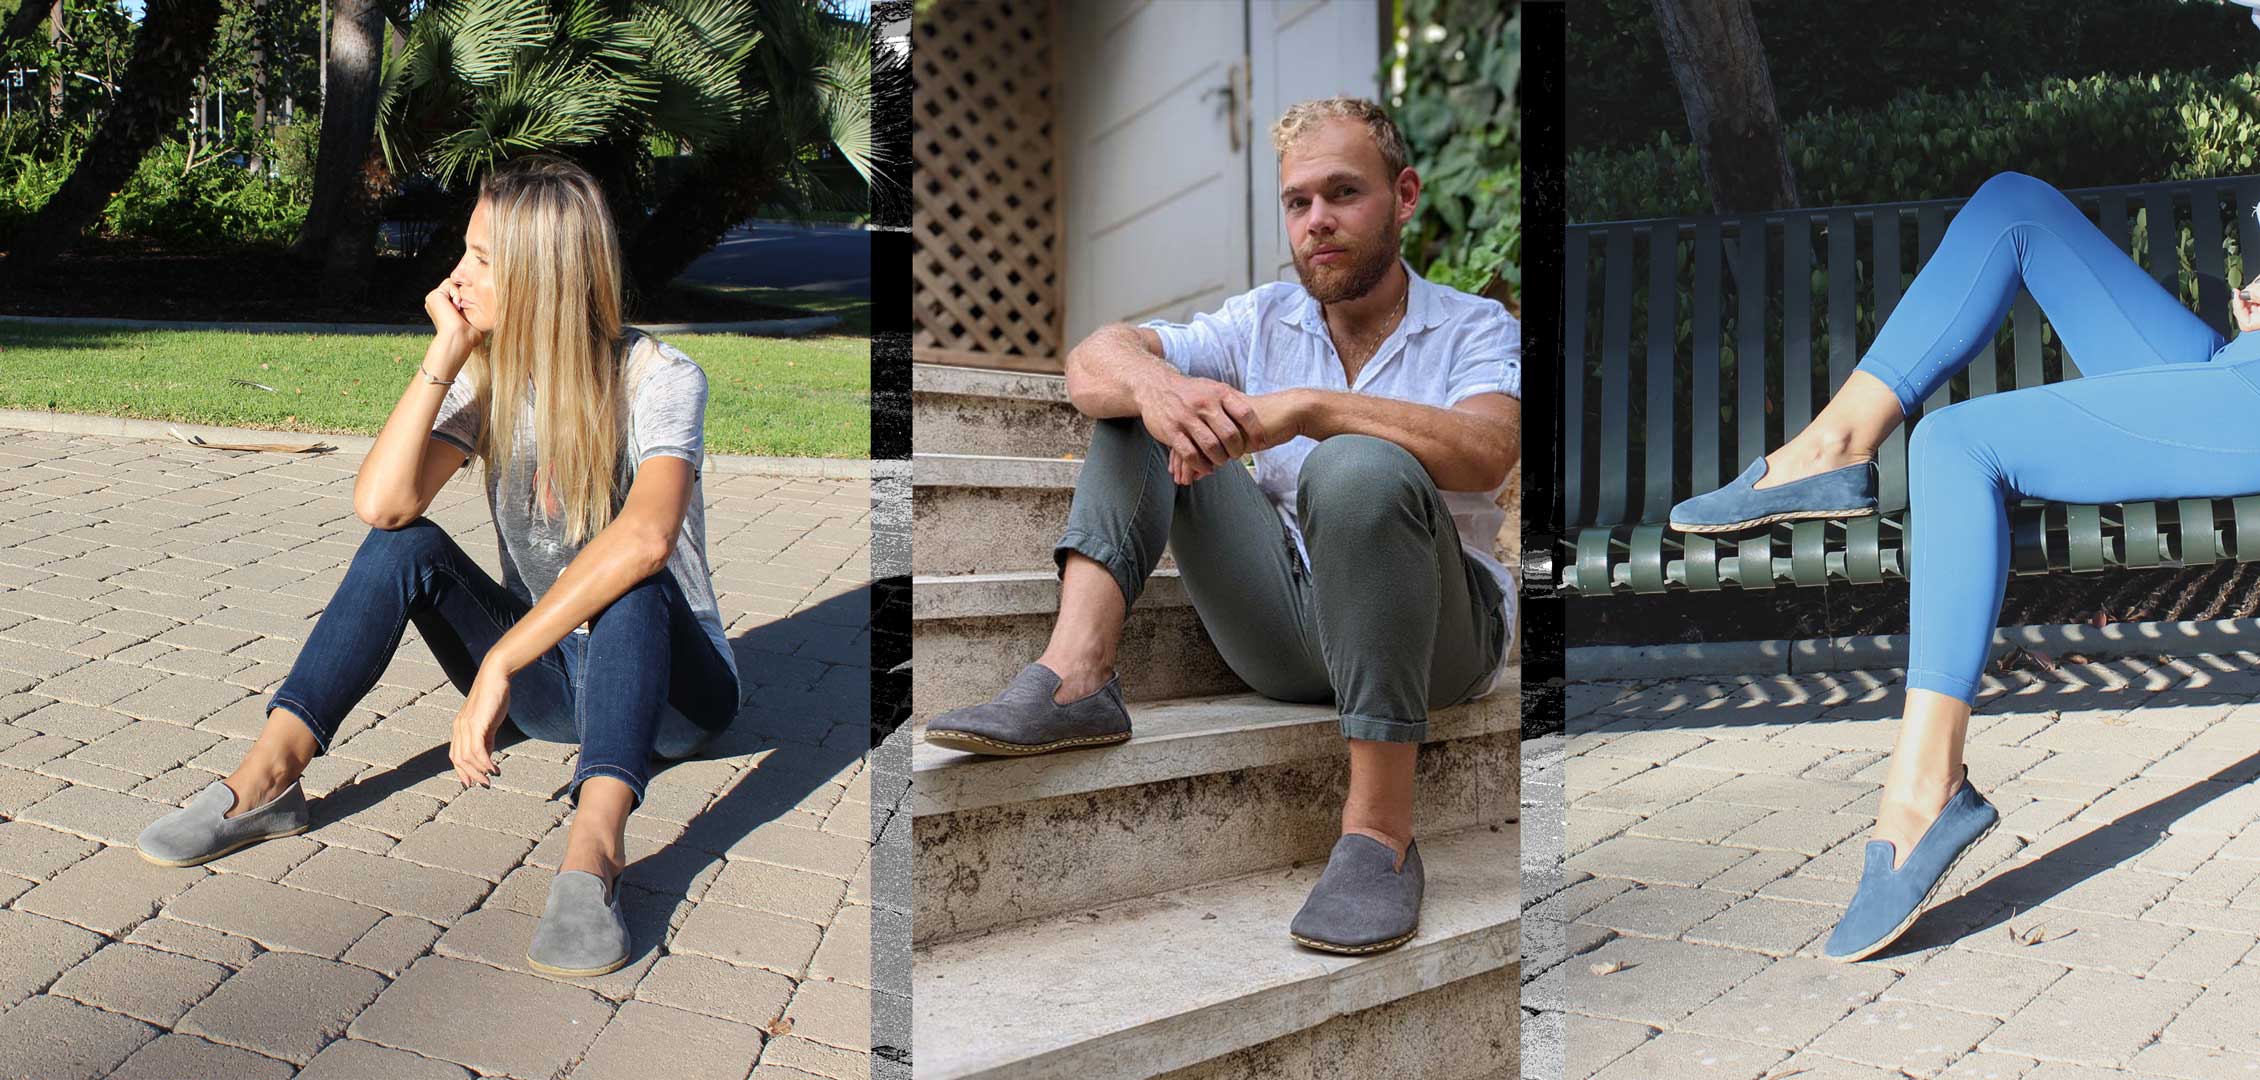 3 Activists Share How Their Shoes Keep Them Grounded